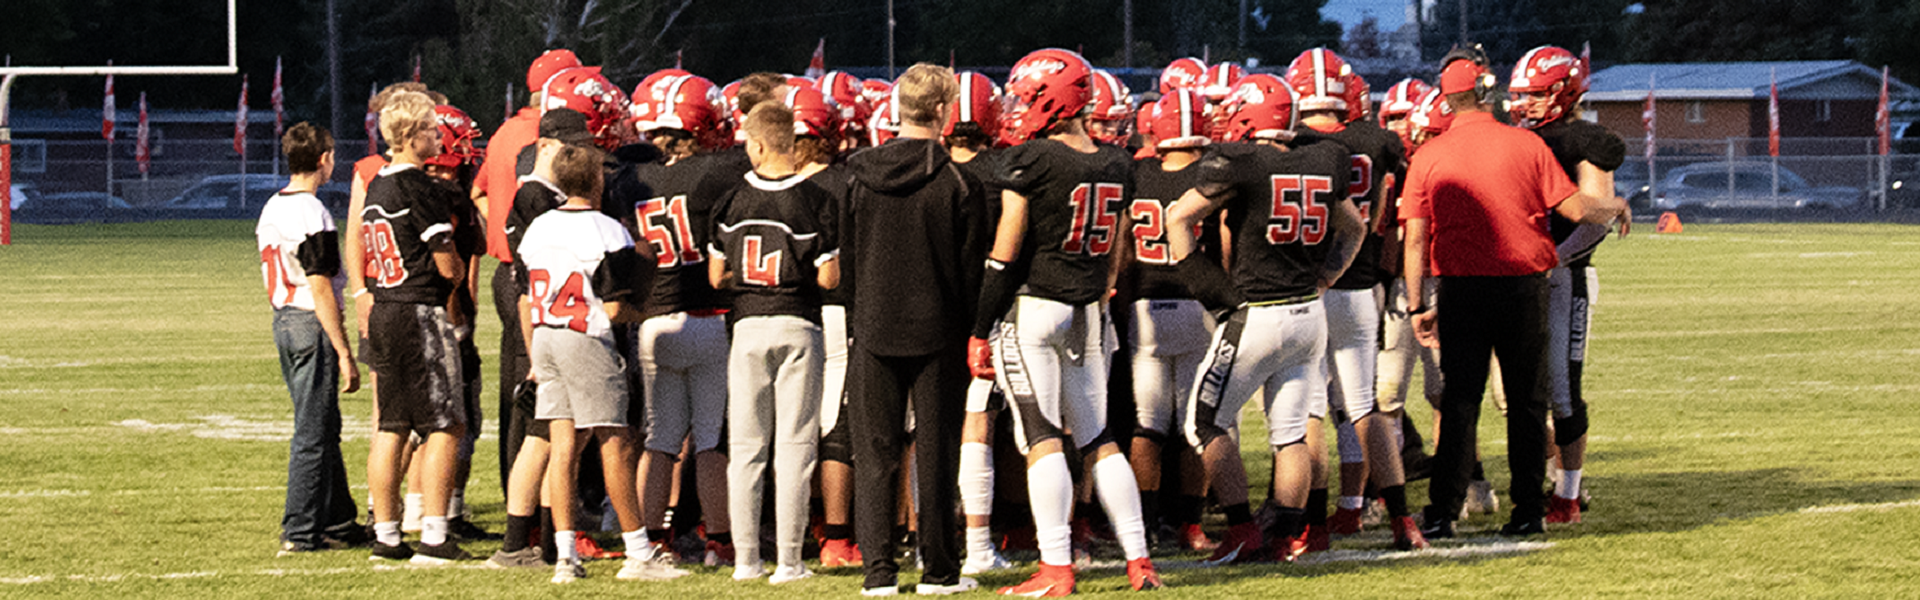 The KHS football team talks during a timeout during a game against Fruitland. | Photo by Hayley Daniels